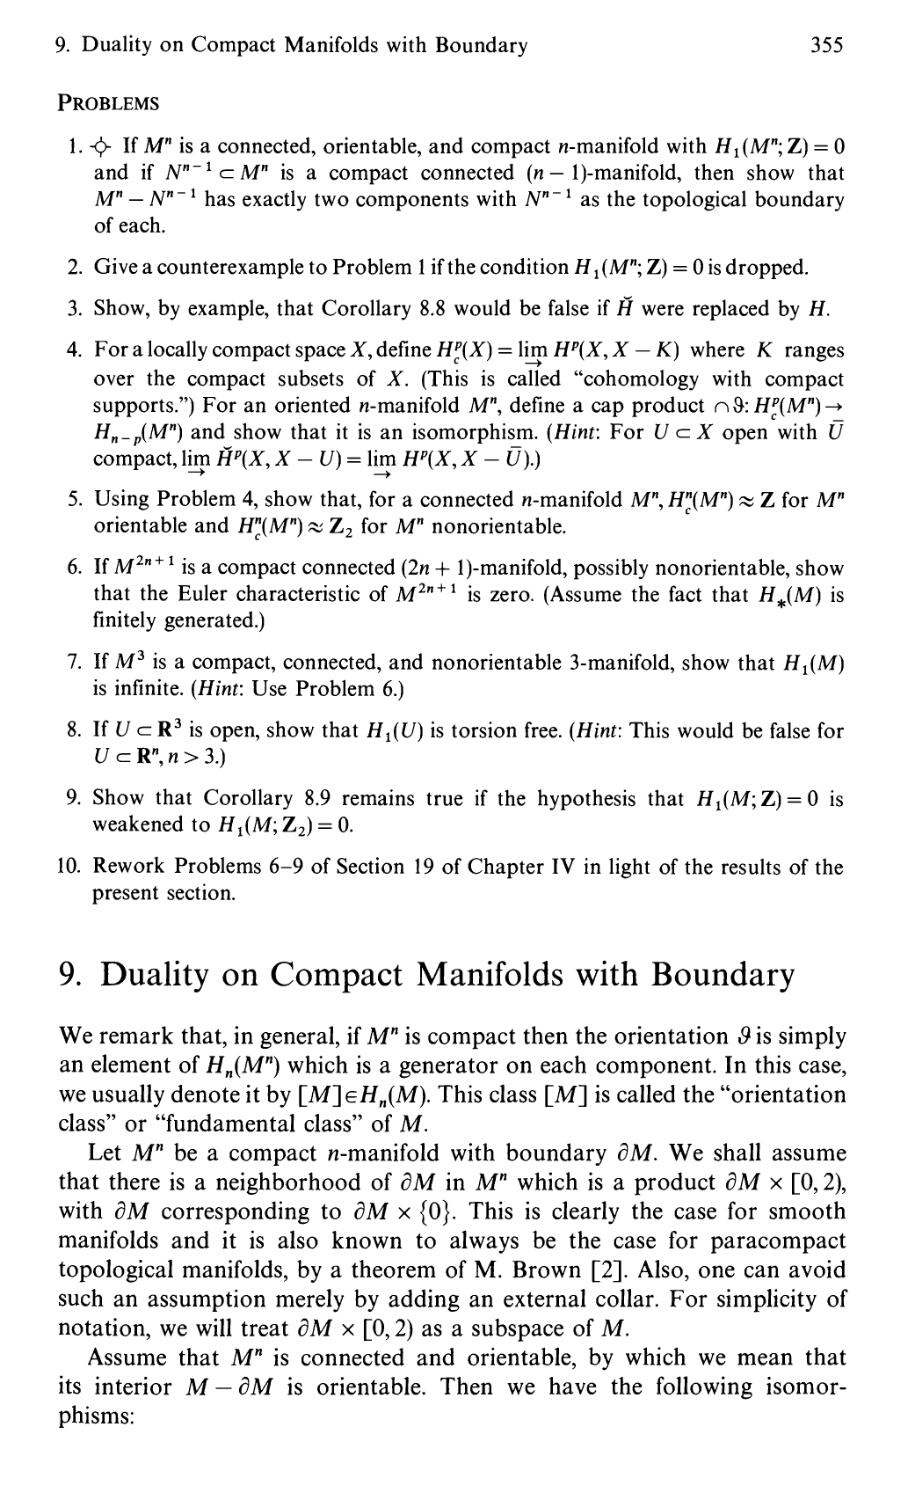 9. Duality on Compact Manifolds with Boundary